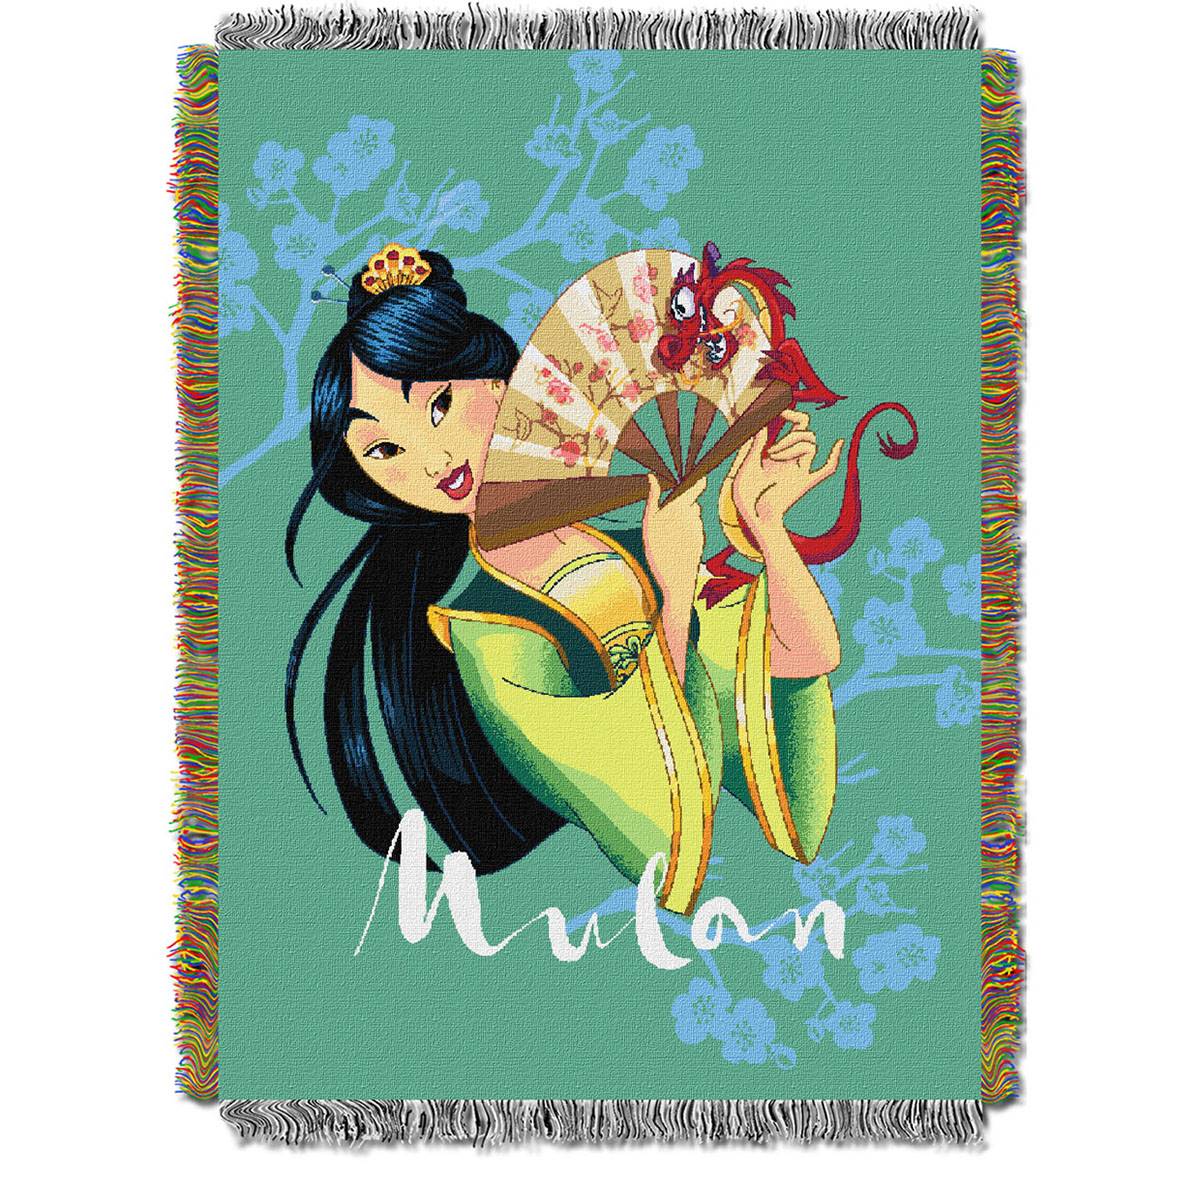 Northwest Princess Mulan Tradition Woven Tapestry Throw